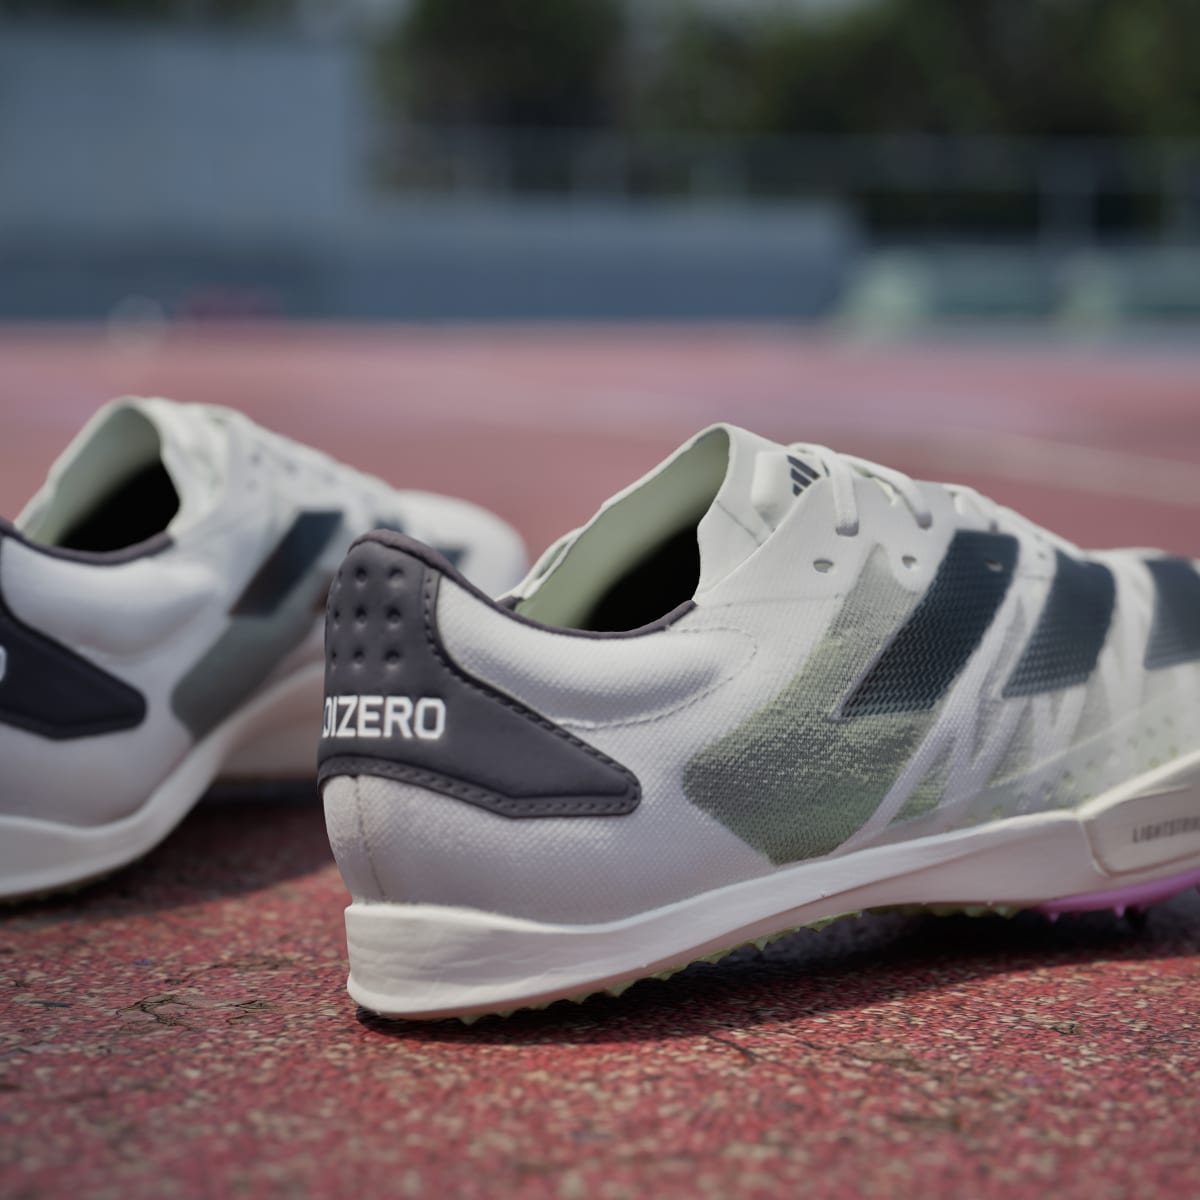 Adidas Adizero Ambition Track and Field Lightstrike Shoes. 9